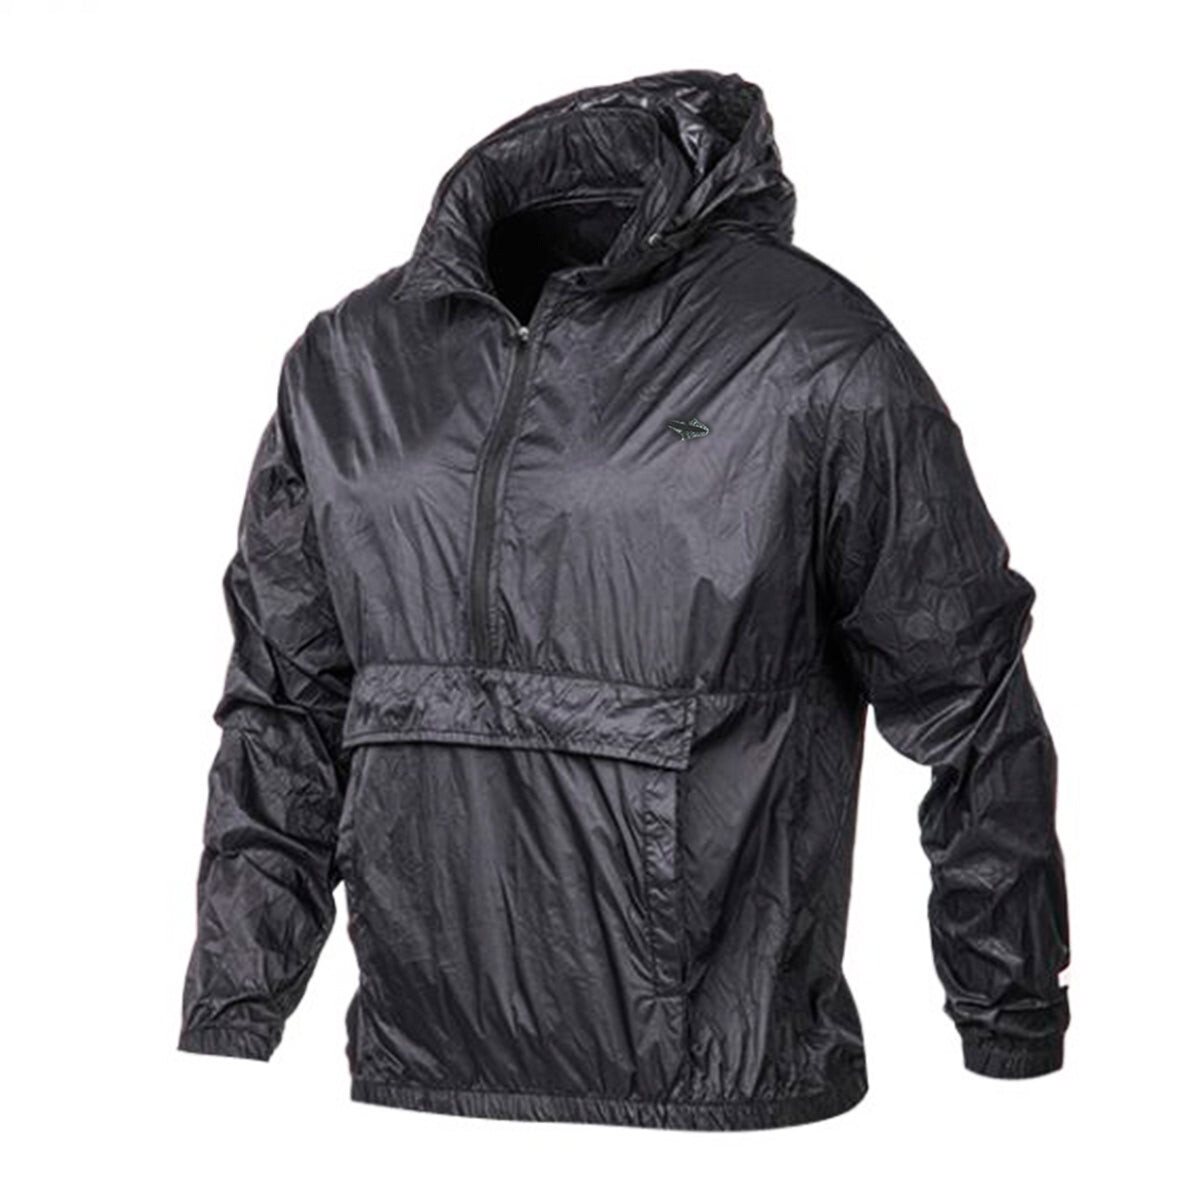 Buzo Canguro Topper Running Rompeviento Impermeable 